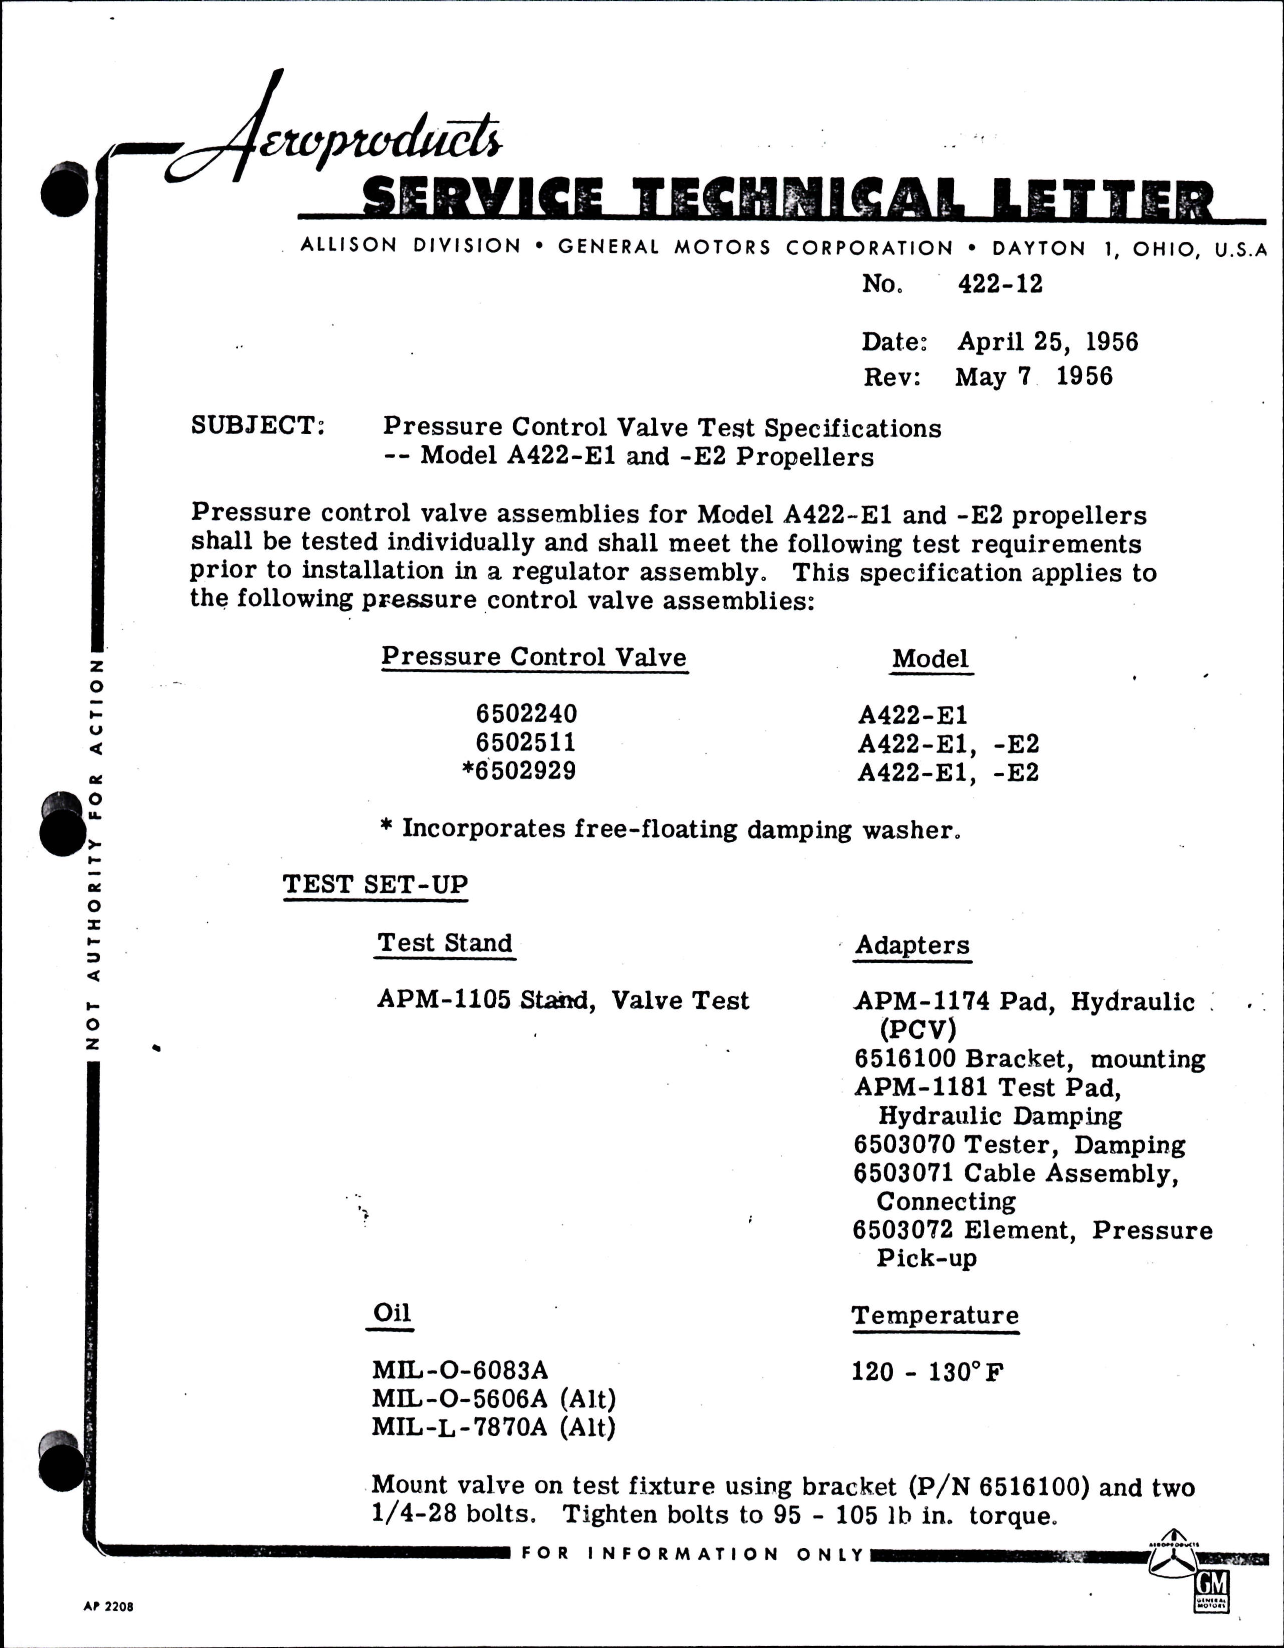 Sample page 1 from AirCorps Library document: Pressure Control Valve Test Specifications for Model A422-E1 and -E2 Propellers